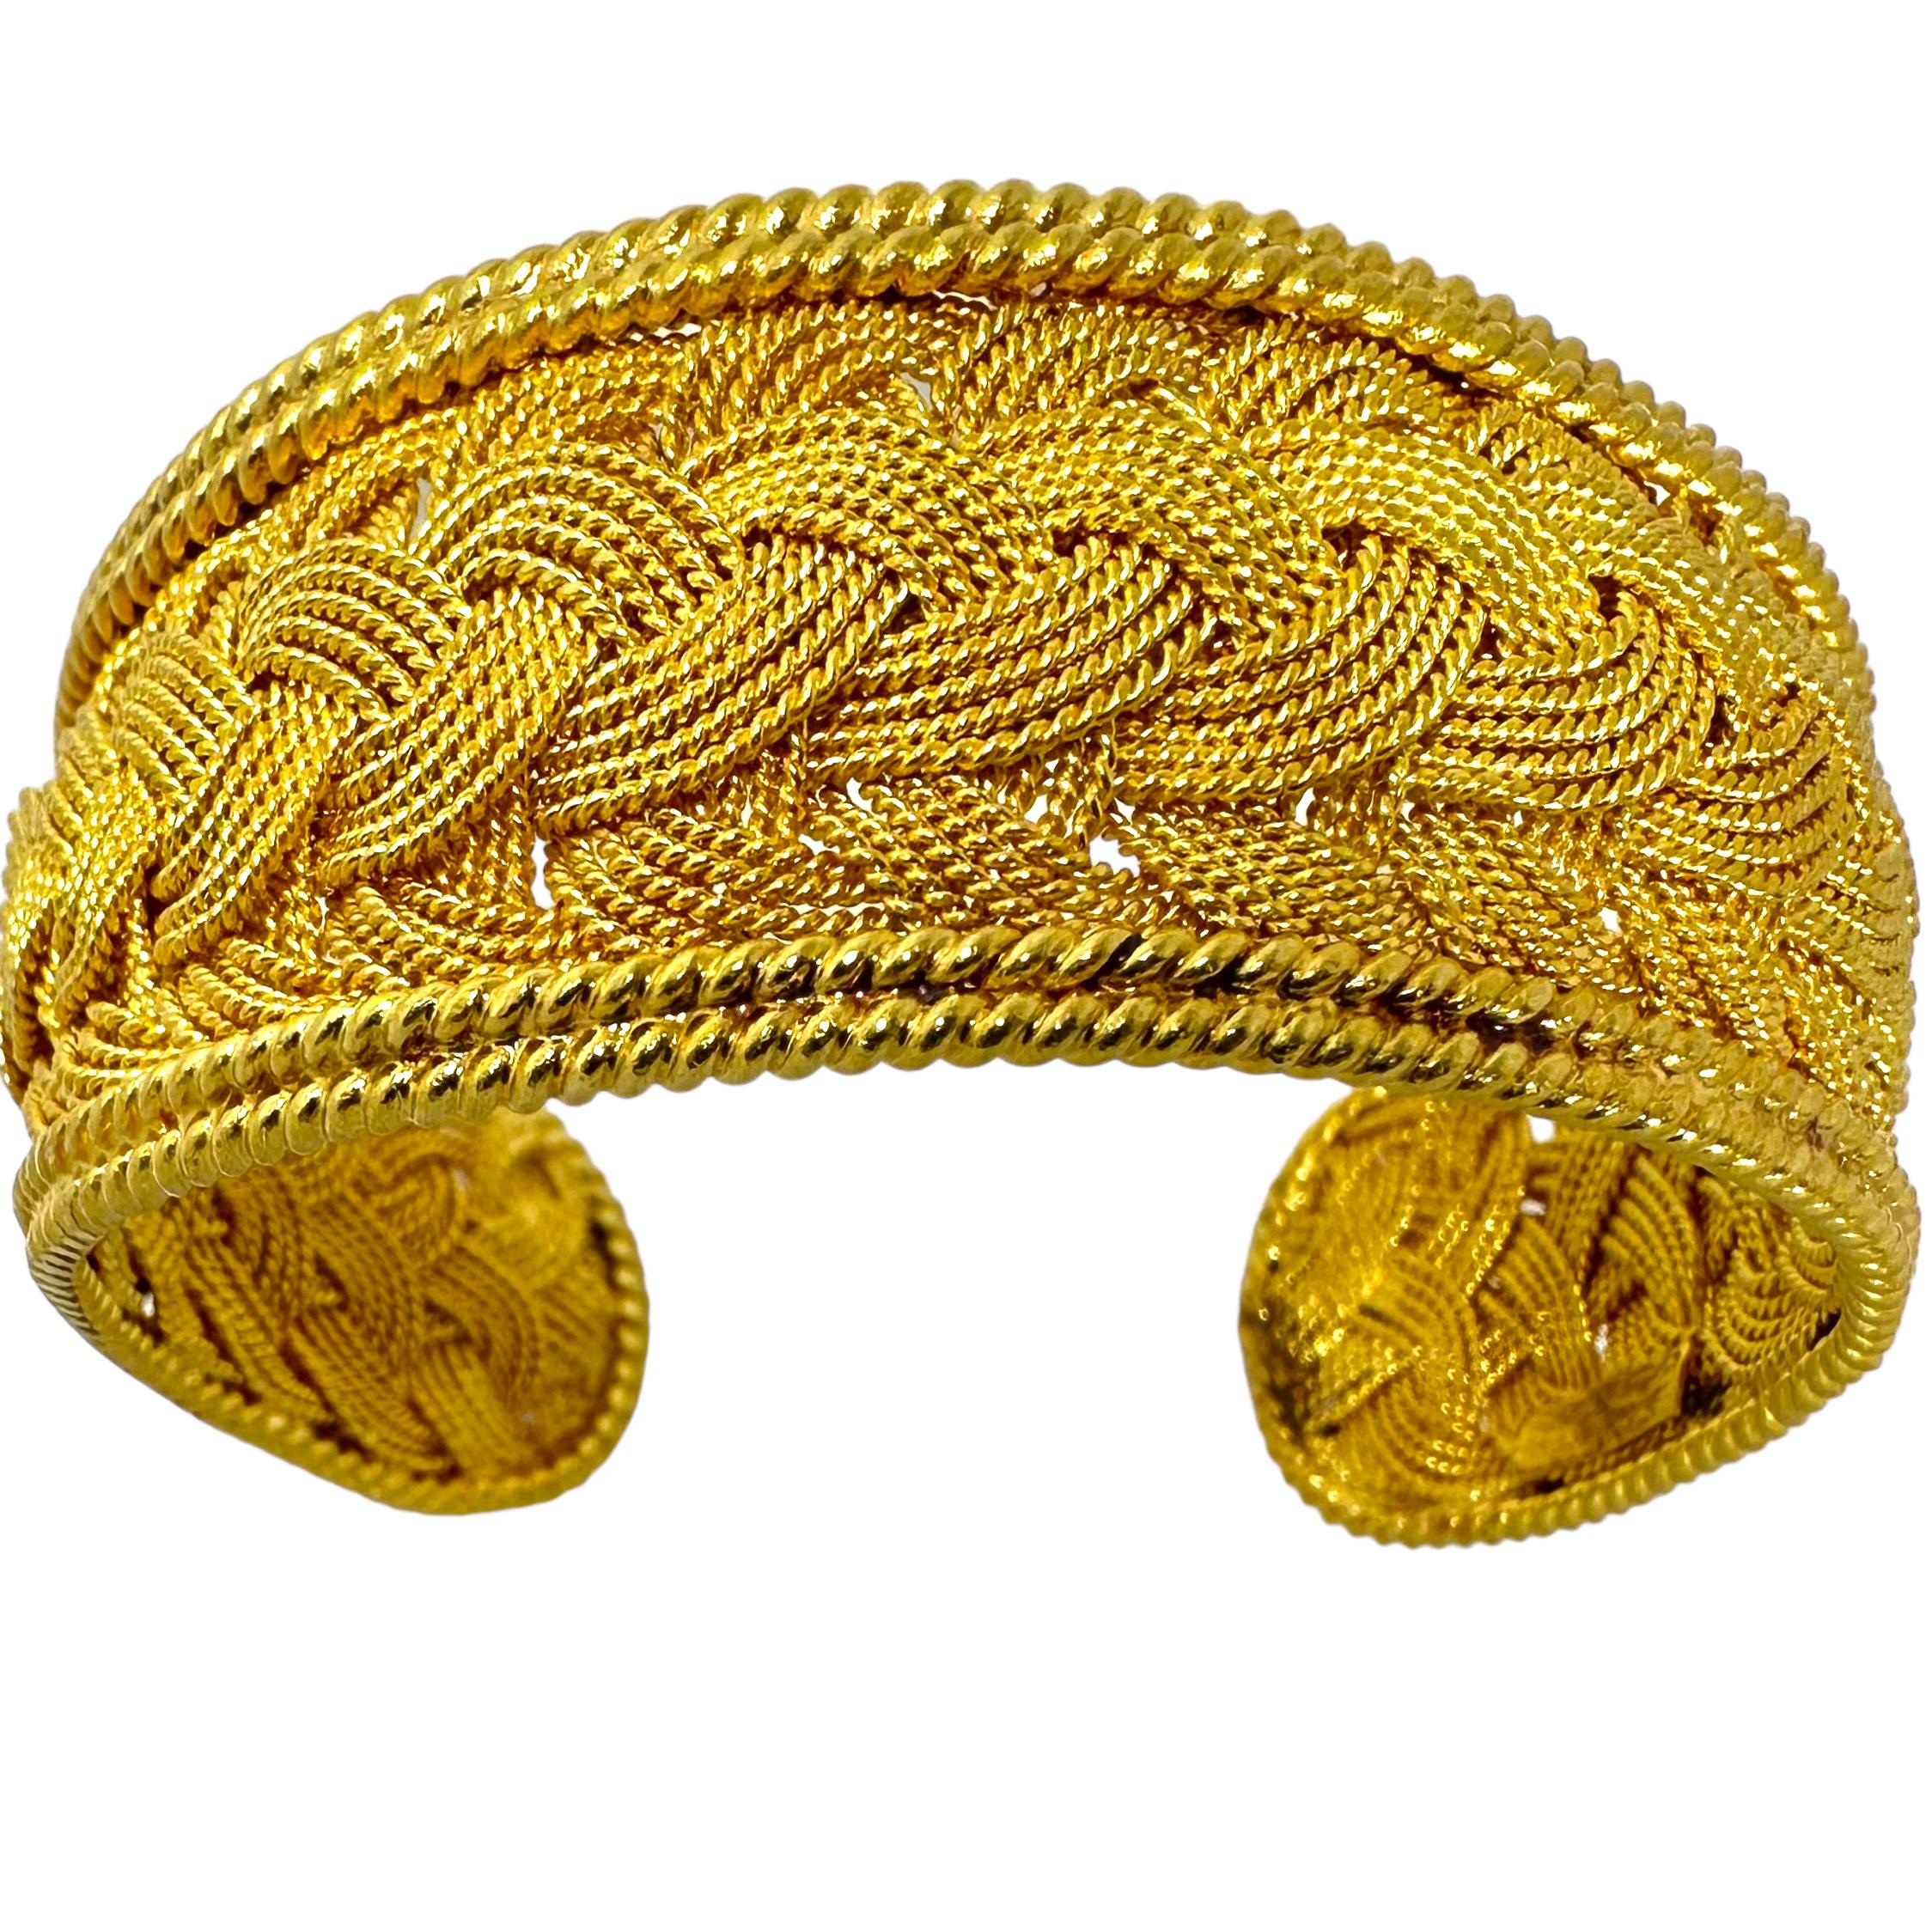 This extraordinary vintage bangle bracelet is a true masterpiece of hand crafting. Long lines of 22k gold have been expertly twisted into gold rope and braided over the bracelet's entire surface. All edges are crafted in a double line of hand